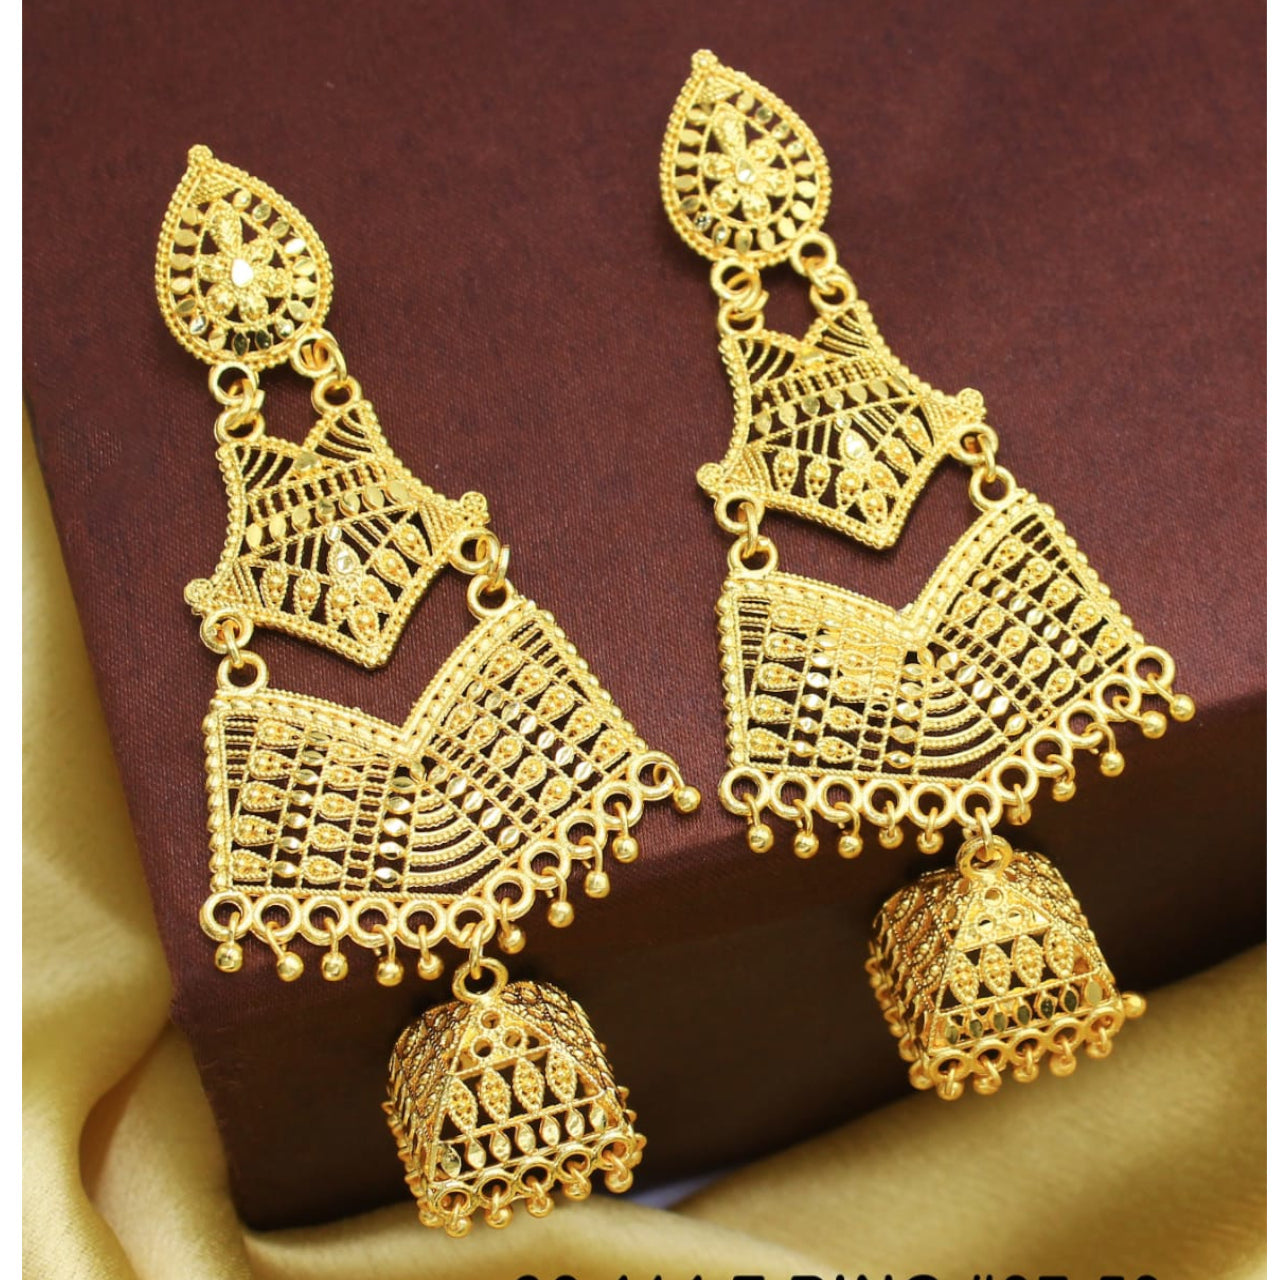 Gold Plated Jhumka Earrings from Mekkna - Intricately Designed and Lightweight